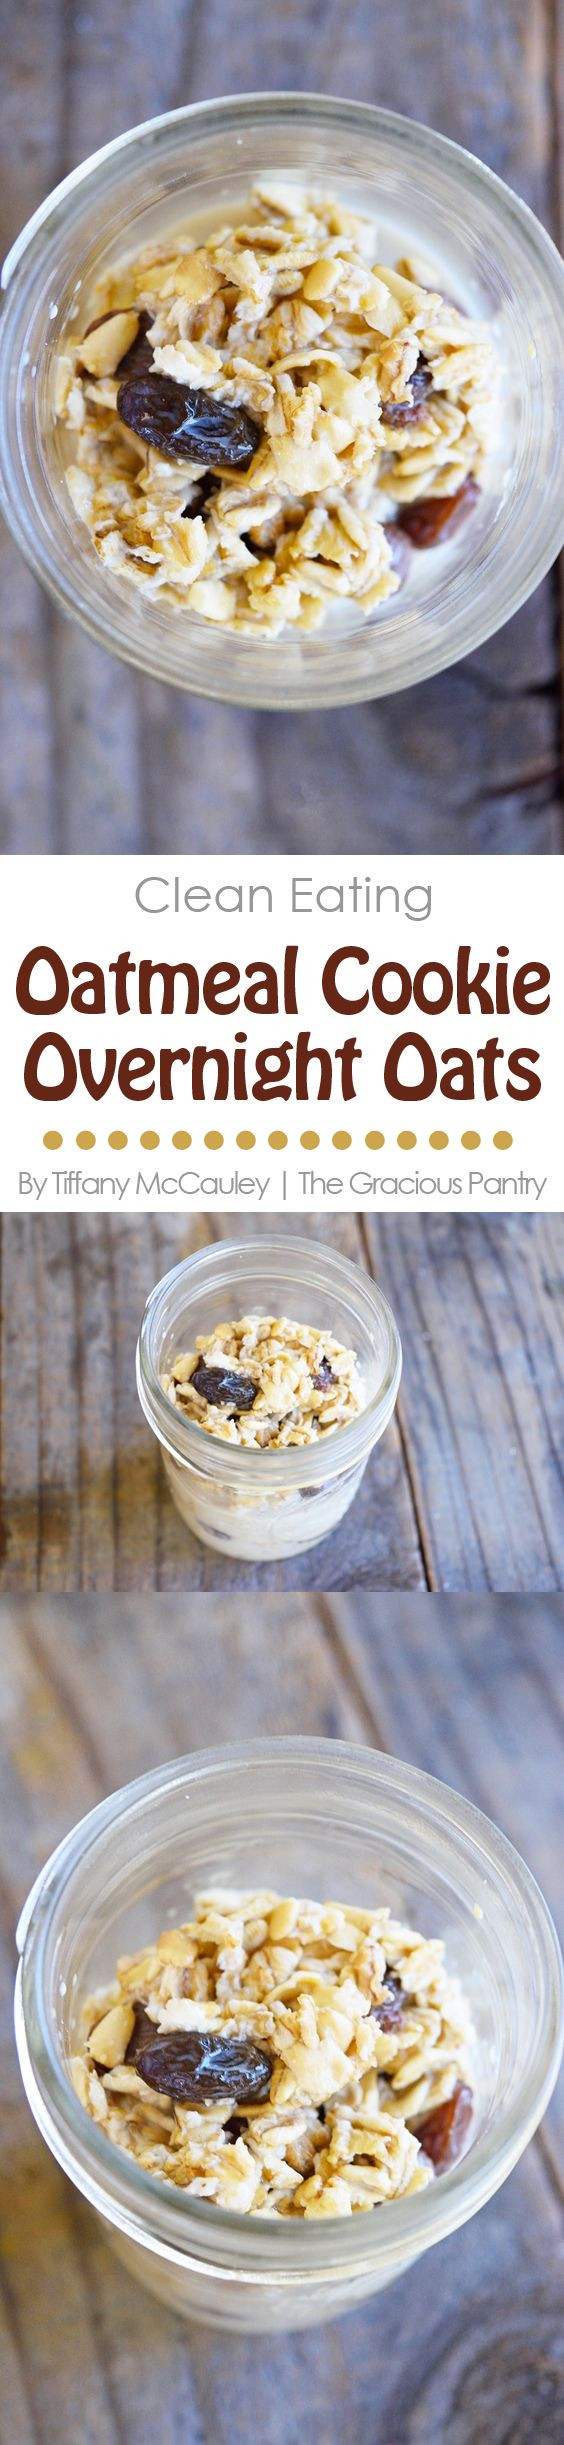 Clean Eating Oatmeal
 74 best Clean Eating Recipes With 5 Ingre nts or Less